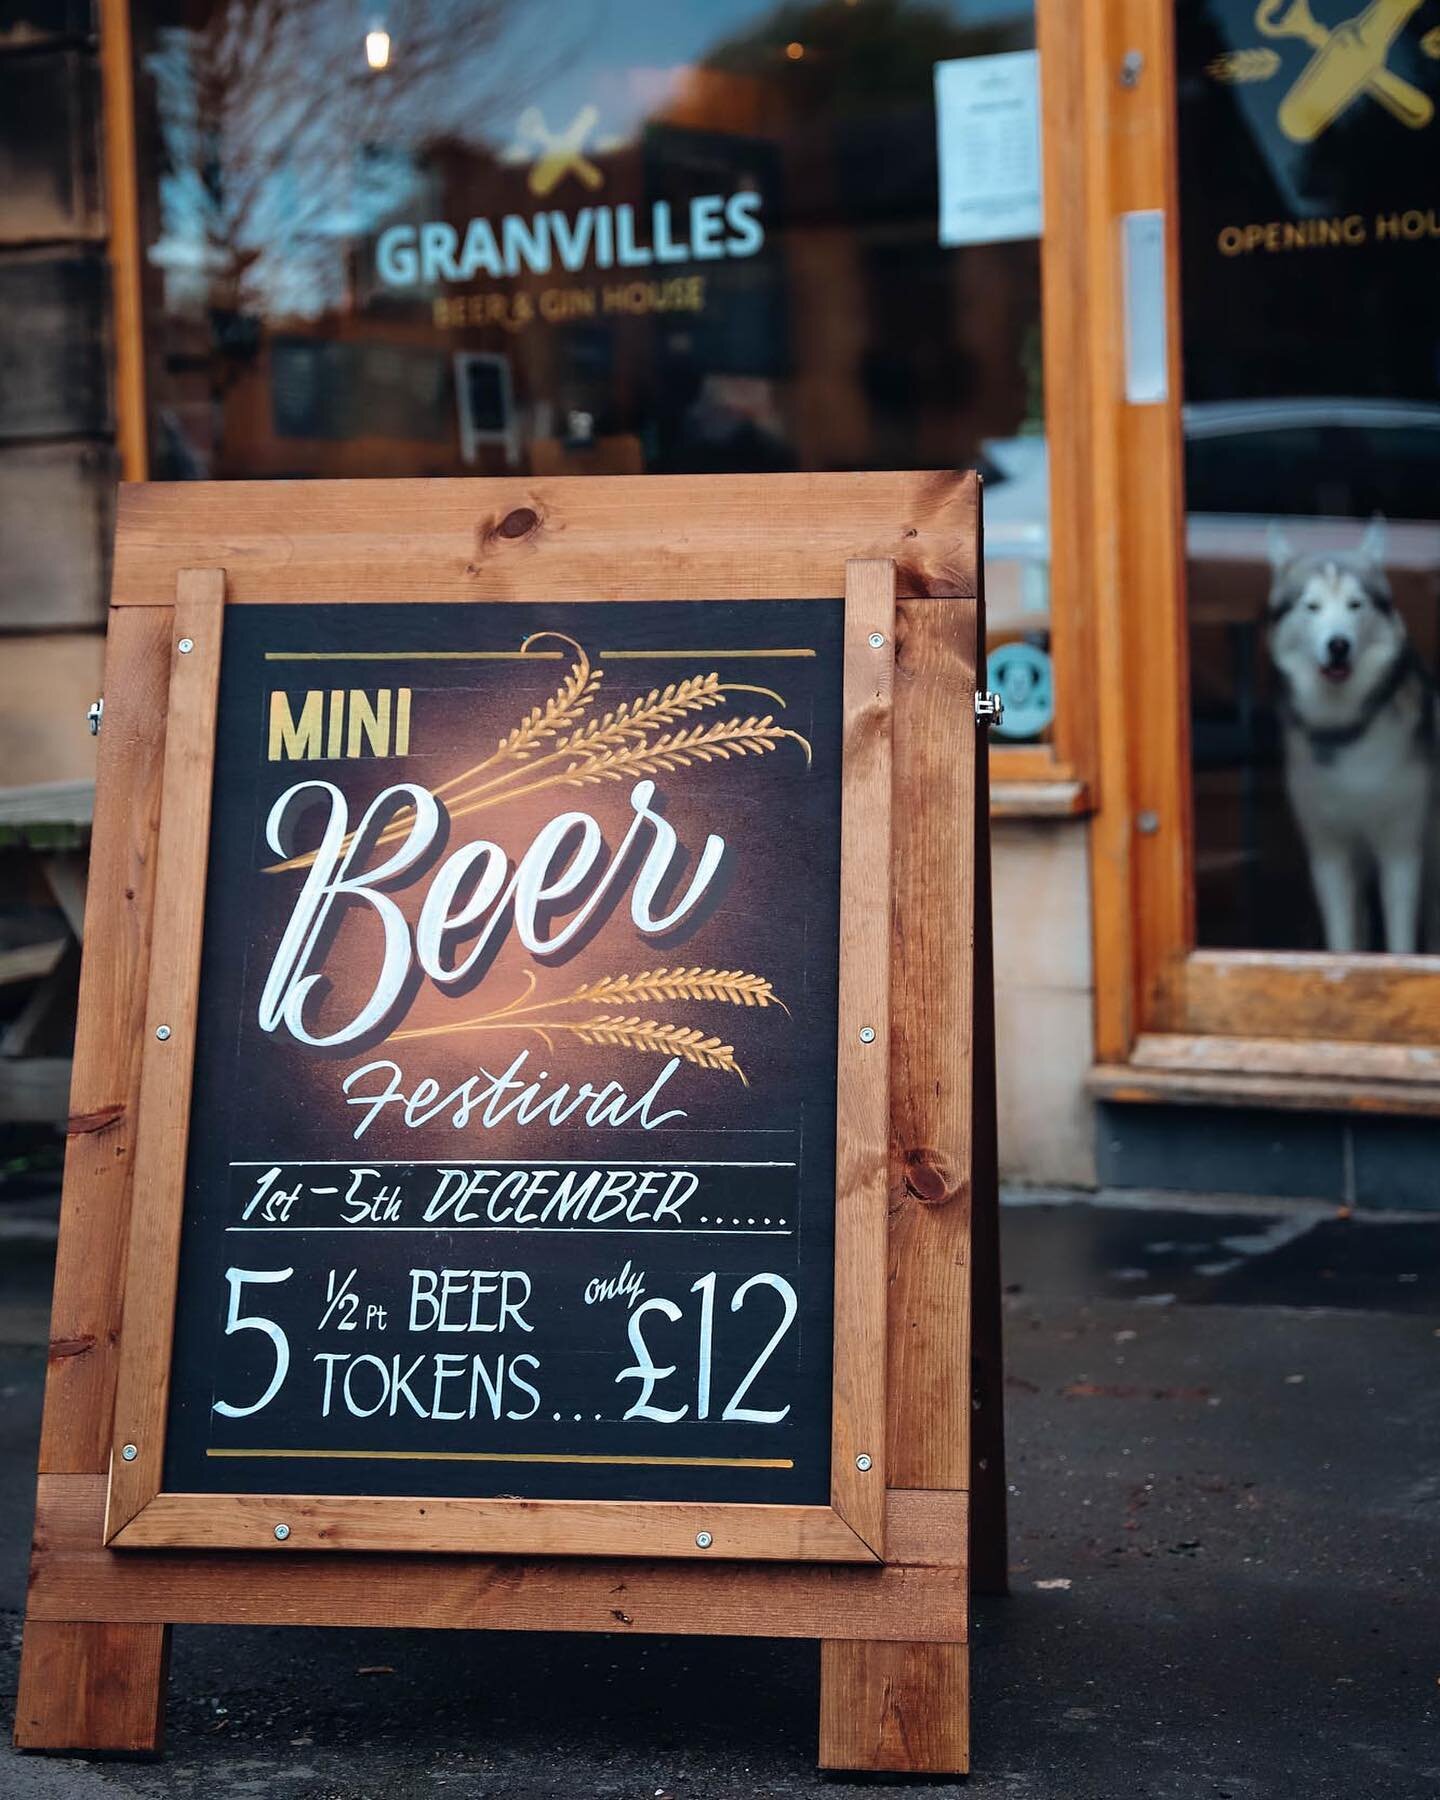 🚨Heads up !! Mini beer festival this weekend!! 🍻

Come in and sample the delights of some very special beers from all your favourite local breweries @kirkstallbrewery @vocationbrewery @wildechildbrewing @northernmonk @ratbrewery @frulibeer @harroga